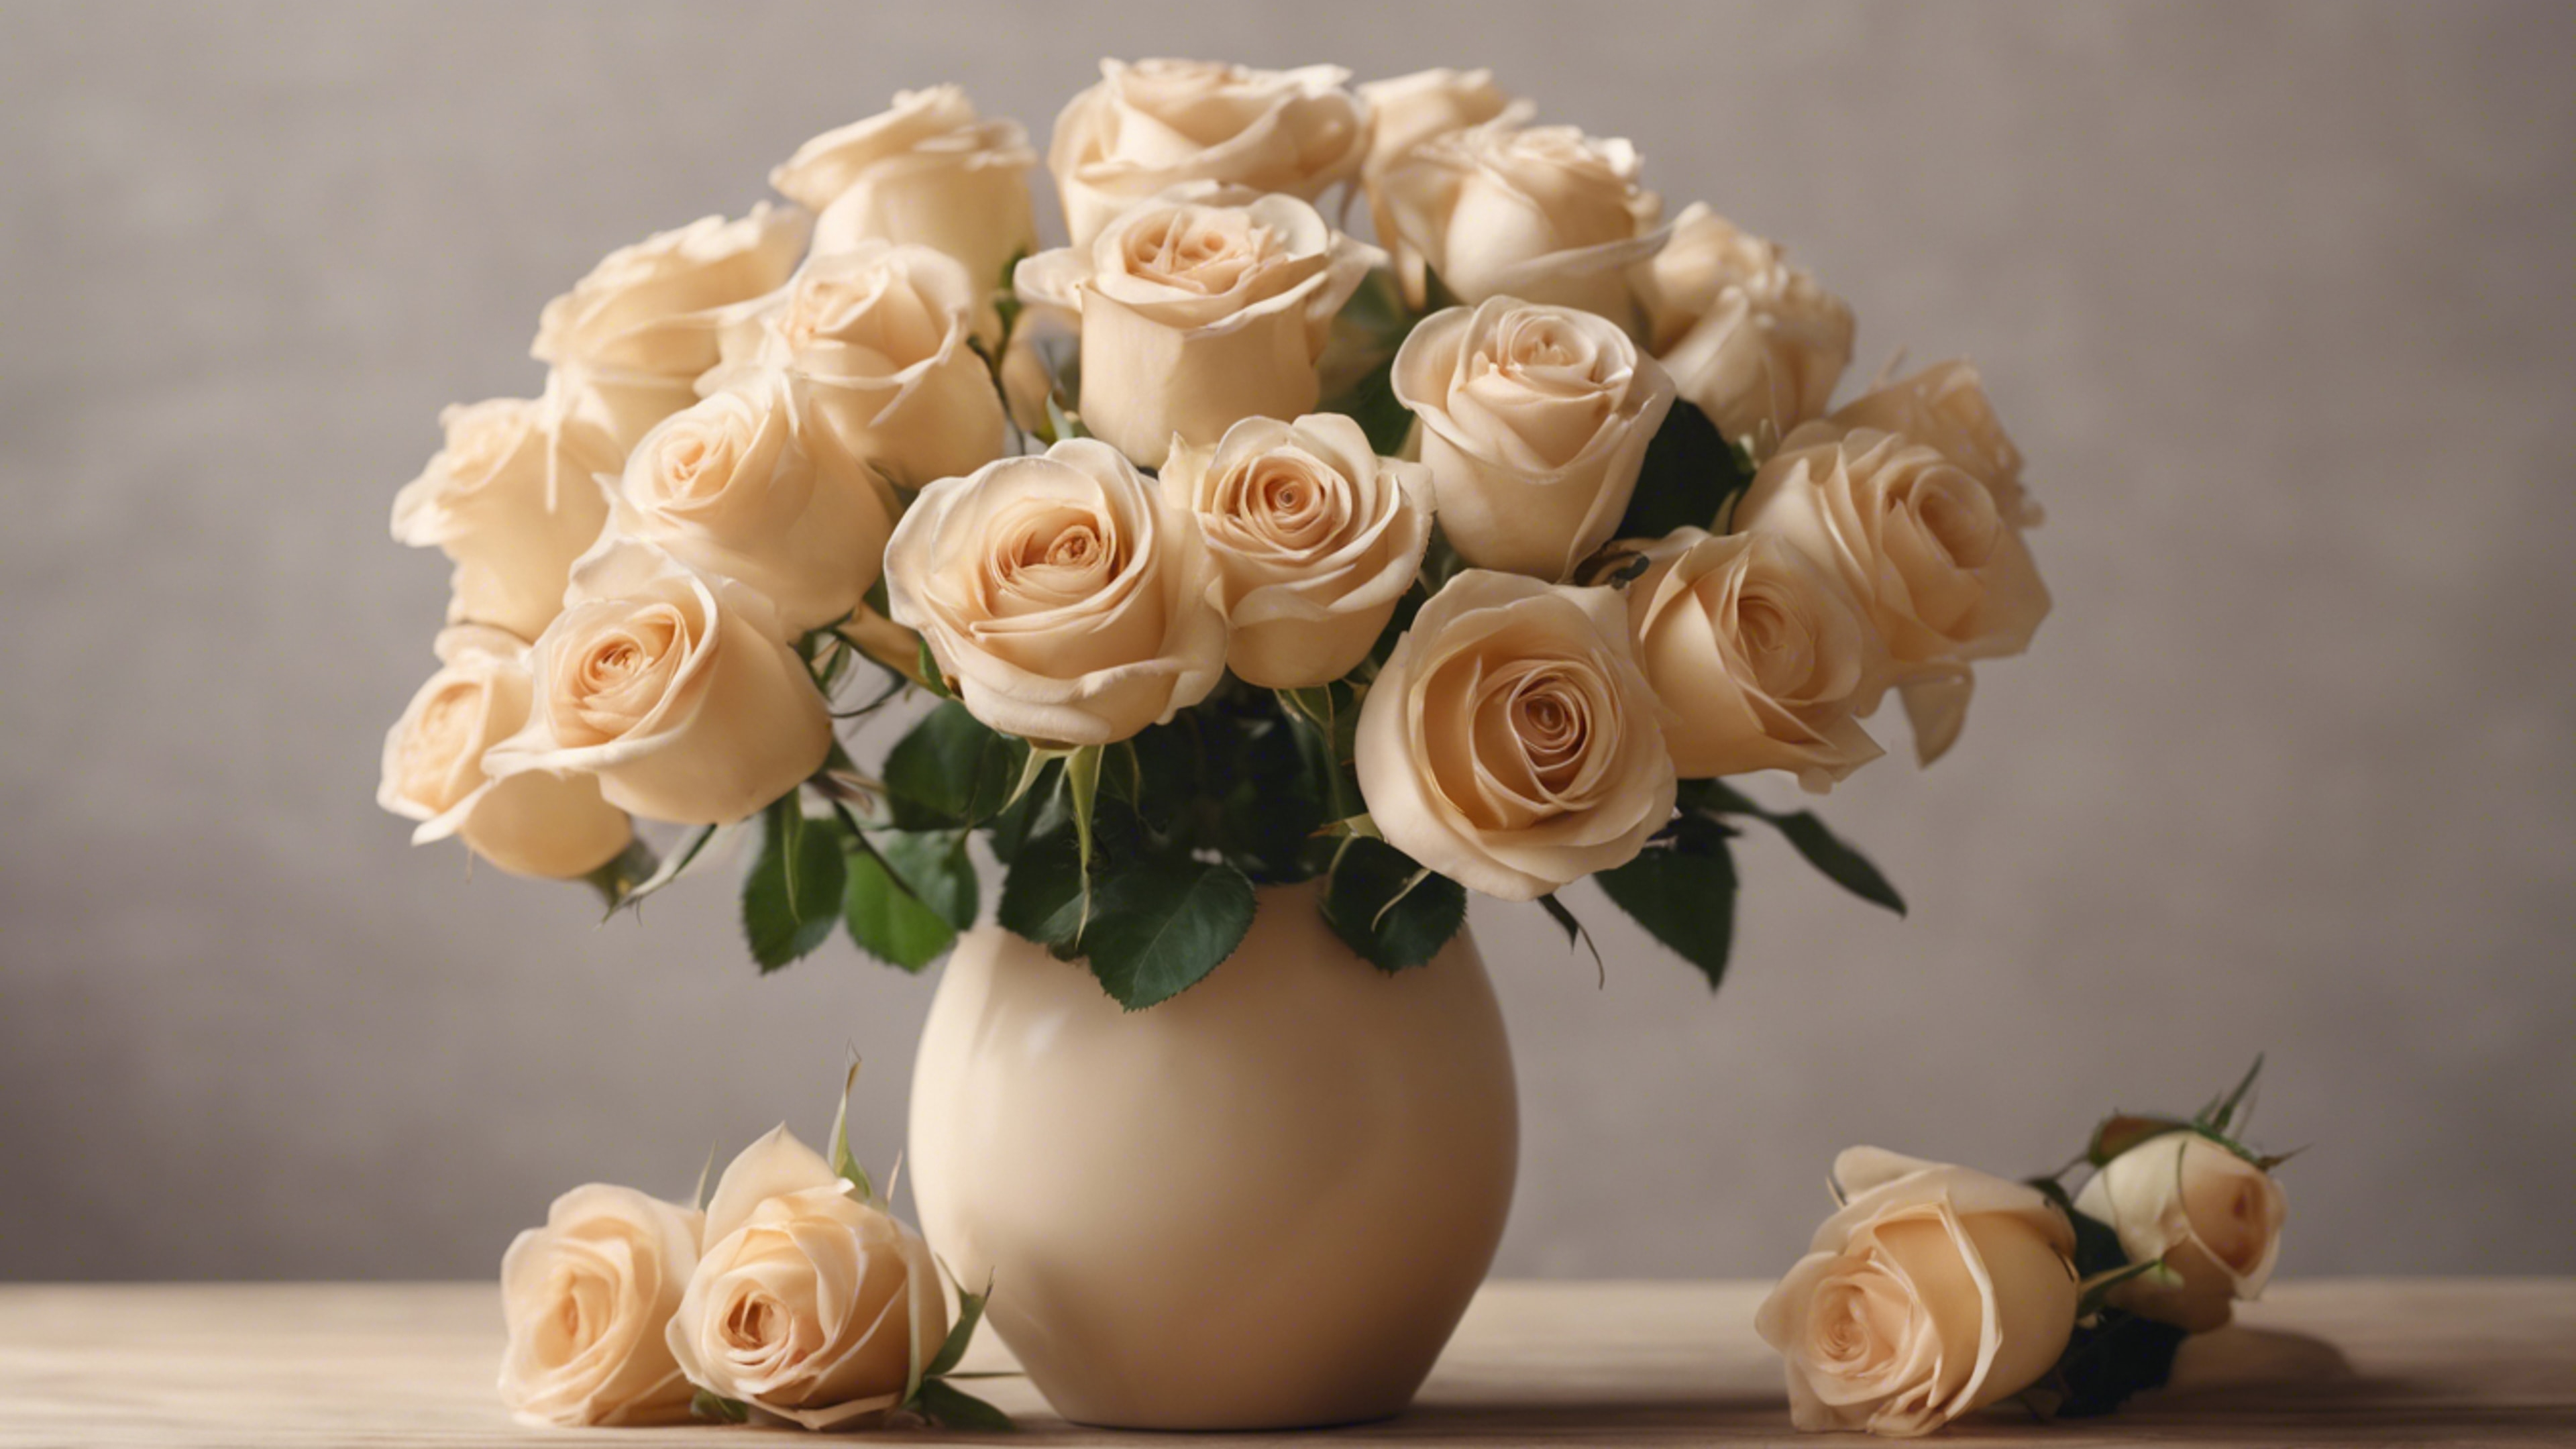 Still life of beige colored Roses arranged in a beige ceramic vase on a wooden table. Wallpaper[34157814654a454183f5]